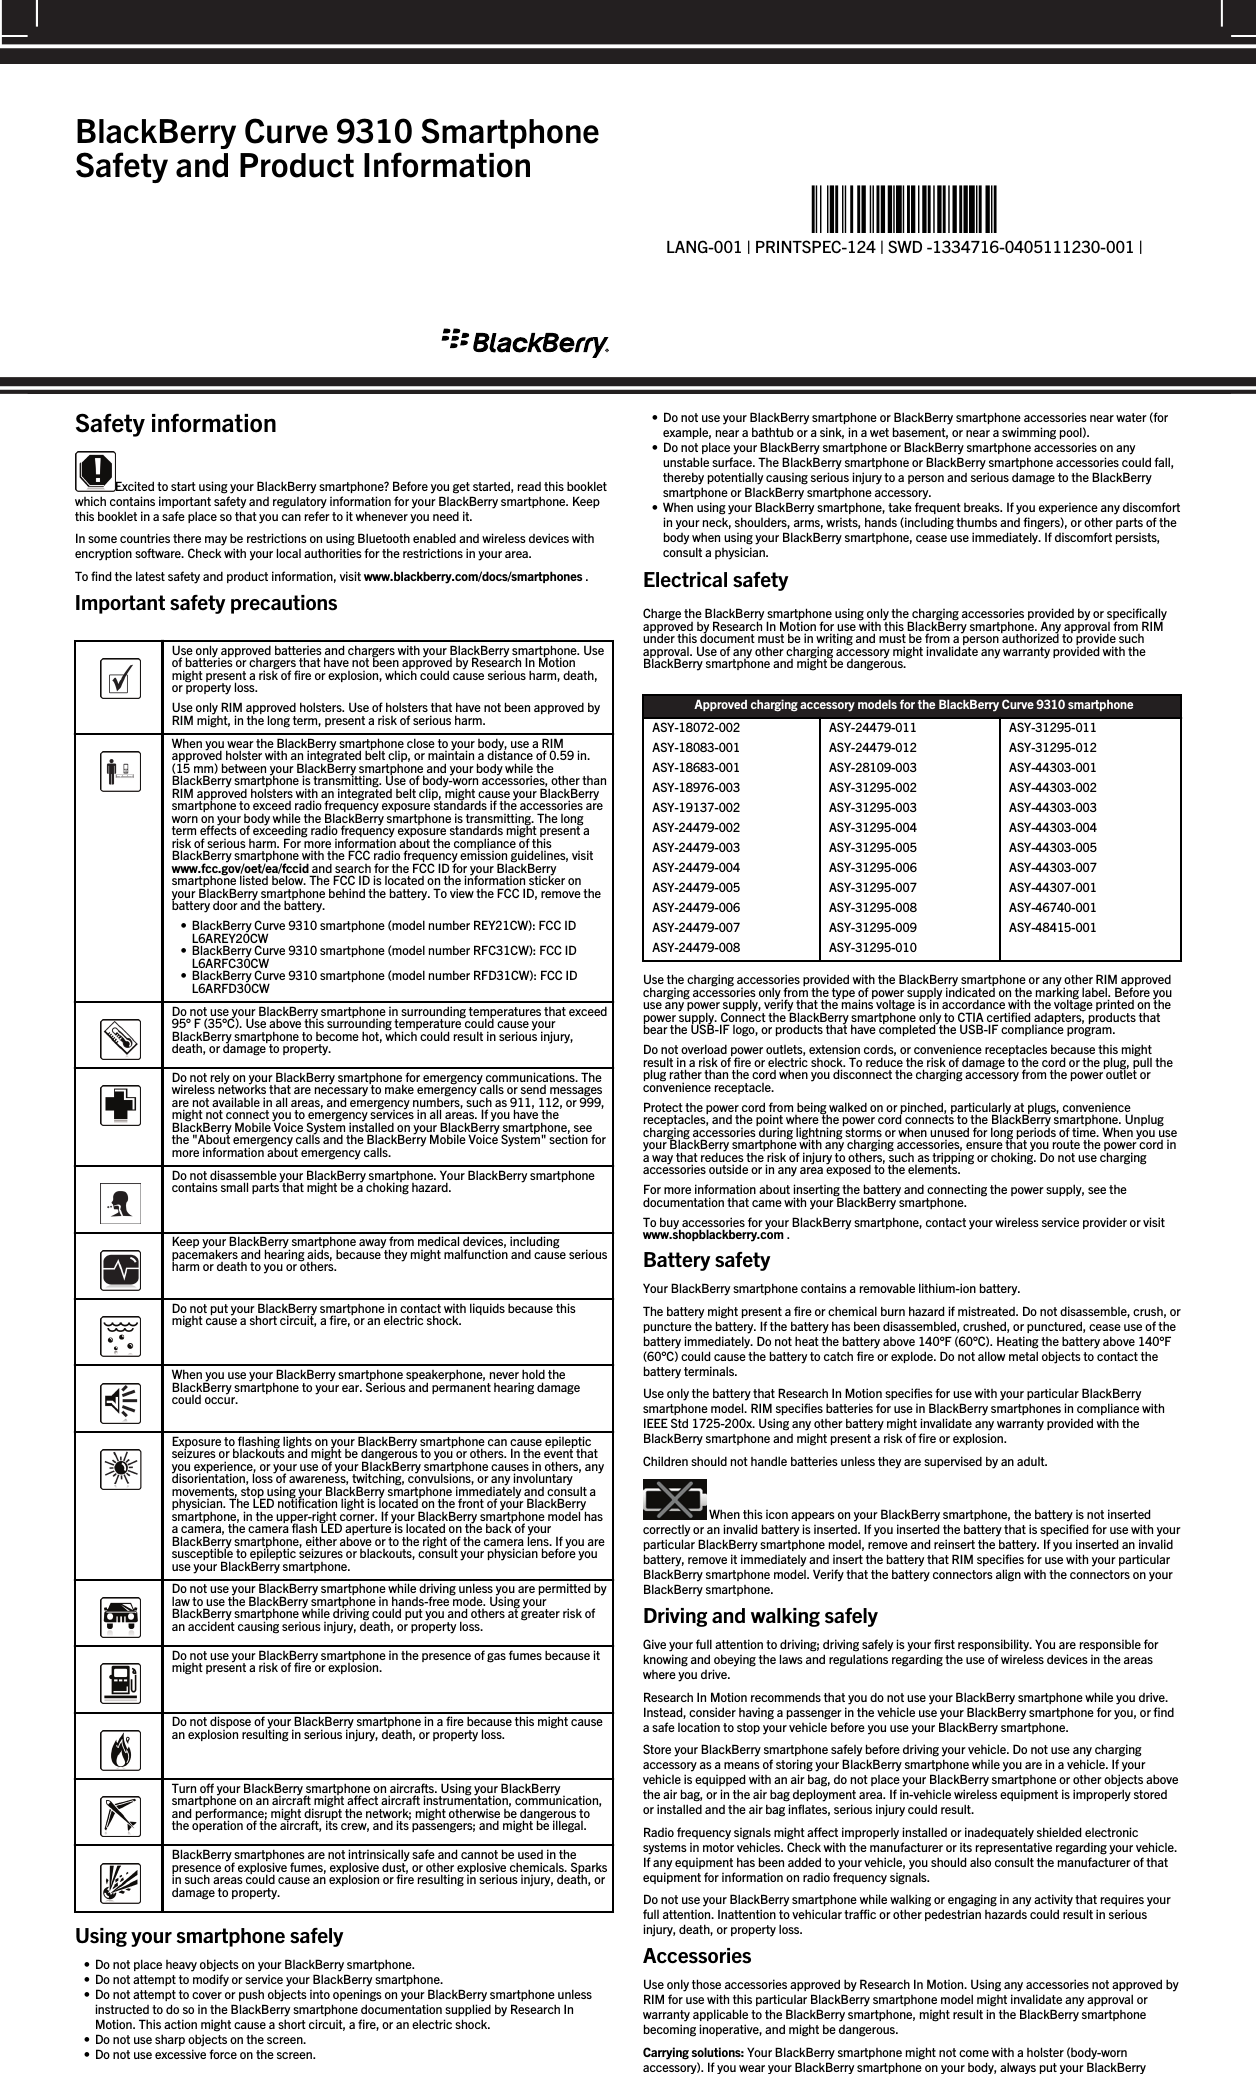 Safety informationExcited to start using your BlackBerry smartphone? Before you get started, read this bookletwhich contains important safety and regulatory information for your BlackBerry smartphone. Keepthis booklet in a safe place so that you can refer to it whenever you need it.In some countries there may be restrictions on using Bluetooth enabled and wireless devices withencryption software. Check with your local authorities for the restrictions in your area.To find the latest safety and product information, visit www.blackberry.com/docs/smartphones .Important safety precautions  Use only approved batteries and chargers with your BlackBerry smartphone. Useof batteries or chargers that have not been approved by Research In Motionmight present a risk of fire or explosion, which could cause serious harm, death,or property loss.Use only RIM approved holsters. Use of holsters that have not been approved byRIM might, in the long term, present a risk of serious harm.  When you wear the BlackBerry smartphone close to your body, use a RIMapproved holster with an integrated belt clip, or maintain a distance of 0.59 in.(15 mm) between your BlackBerry smartphone and your body while theBlackBerry smartphone is transmitting. Use of body-worn accessories, other thanRIM approved holsters with an integrated belt clip, might cause your BlackBerrysmartphone to exceed radio frequency exposure standards if the accessories areworn on your body while the BlackBerry smartphone is transmitting. The longterm effects of exceeding radio frequency exposure standards might present arisk of serious harm. For more information about the compliance of thisBlackBerry smartphone with the FCC radio frequency emission guidelines, visitwww.fcc.gov/oet/ea/fccid and search for the FCC ID for your BlackBerrysmartphone listed below. The FCC ID is located on the information sticker onyour BlackBerry smartphone behind the battery. To view the FCC ID, remove thebattery door and the battery.• BlackBerry Curve 9310 smartphone (model number REY21CW): FCC IDL6AREY20CW• BlackBerry Curve 9310 smartphone (model number RFC31CW): FCC IDL6ARFC30CW• BlackBerry Curve 9310 smartphone (model number RFD31CW): FCC IDL6ARFD30CW  Do not use your BlackBerry smartphone in surrounding temperatures that exceed95° F (35°C). Use above this surrounding temperature could cause yourBlackBerry smartphone to become hot, which could result in serious injury,death, or damage to property.  Do not rely on your BlackBerry smartphone for emergency communications. Thewireless networks that are necessary to make emergency calls or send messagesare not available in all areas, and emergency numbers, such as 911, 112, or 999,might not connect you to emergency services in all areas. If you have theBlackBerry Mobile Voice System installed on your BlackBerry smartphone, seethe &quot;About emergency calls and the BlackBerry Mobile Voice System&quot; section formore information about emergency calls.  Do not disassemble your BlackBerry smartphone. Your BlackBerry smartphonecontains small parts that might be a choking hazard.  Keep your BlackBerry smartphone away from medical devices, includingpacemakers and hearing aids, because they might malfunction and cause seriousharm or death to you or others.  Do not put your BlackBerry smartphone in contact with liquids because thismight cause a short circuit, a fire, or an electric shock.  When you use your BlackBerry smartphone speakerphone, never hold theBlackBerry smartphone to your ear. Serious and permanent hearing damagecould occur.  Exposure to flashing lights on your BlackBerry smartphone can cause epilepticseizures or blackouts and might be dangerous to you or others. In the event thatyou experience, or your use of your BlackBerry smartphone causes in others, anydisorientation, loss of awareness, twitching, convulsions, or any involuntarymovements, stop using your BlackBerry smartphone immediately and consult aphysician. The LED notification light is located on the front of your BlackBerrysmartphone, in the upper-right corner. If your BlackBerry smartphone model hasa camera, the camera flash LED aperture is located on the back of yourBlackBerry smartphone, either above or to the right of the camera lens. If you aresusceptible to epileptic seizures or blackouts, consult your physician before youuse your BlackBerry smartphone.  Do not use your BlackBerry smartphone while driving unless you are permitted bylaw to use the BlackBerry smartphone in hands-free mode. Using yourBlackBerry smartphone while driving could put you and others at greater risk ofan accident causing serious injury, death, or property loss.  Do not use your BlackBerry smartphone in the presence of gas fumes because itmight present a risk of fire or explosion.  Do not dispose of your BlackBerry smartphone in a fire because this might causean explosion resulting in serious injury, death, or property loss.  Turn off your BlackBerry smartphone on aircrafts. Using your BlackBerrysmartphone on an aircraft might affect aircraft instrumentation, communication,and performance; might disrupt the network; might otherwise be dangerous tothe operation of the aircraft, its crew, and its passengers; and might be illegal.  BlackBerry smartphones are not intrinsically safe and cannot be used in thepresence of explosive fumes, explosive dust, or other explosive chemicals. Sparksin such areas could cause an explosion or fire resulting in serious injury, death, ordamage to property.Using your smartphone safely• Do not place heavy objects on your BlackBerry smartphone.• Do not attempt to modify or service your BlackBerry smartphone.• Do not attempt to cover or push objects into openings on your BlackBerry smartphone unlessinstructed to do so in the BlackBerry smartphone documentation supplied by Research InMotion. This action might cause a short circuit, a fire, or an electric shock.• Do not use sharp objects on the screen.• Do not use excessive force on the screen.• Do not use your BlackBerry smartphone or BlackBerry smartphone accessories near water (forexample, near a bathtub or a sink, in a wet basement, or near a swimming pool).• Do not place your BlackBerry smartphone or BlackBerry smartphone accessories on anyunstable surface. The BlackBerry smartphone or BlackBerry smartphone accessories could fall,thereby potentially causing serious injury to a person and serious damage to the BlackBerrysmartphone or BlackBerry smartphone accessory.• When using your BlackBerry smartphone, take frequent breaks. If you experience any discomfortin your neck, shoulders, arms, wrists, hands (including thumbs and fingers), or other parts of thebody when using your BlackBerry smartphone, cease use immediately. If discomfort persists,consult a physician.Electrical safetyCharge the BlackBerry smartphone using only the charging accessories provided by or specificallyapproved by Research In Motion for use with this BlackBerry smartphone. Any approval from RIMunder this document must be in writing and must be from a person authorized to provide suchapproval. Use of any other charging accessory might invalidate any warranty provided with theBlackBerry smartphone and might be dangerous.Approved charging accessory models for the BlackBerry Curve 9310 smartphoneASY-18072-002ASY-18083-001ASY-18683-001ASY-18976-003ASY-19137-002ASY-24479-002ASY-24479-003ASY-24479-004ASY-24479-005ASY-24479-006ASY-24479-007ASY-24479-008ASY-24479-011ASY-24479-012ASY-28109-003ASY-31295-002ASY-31295-003ASY-31295-004ASY-31295-005ASY-31295-006ASY-31295-007ASY-31295-008ASY-31295-009ASY-31295-010ASY-31295-011ASY-31295-012ASY-44303-001ASY-44303-002ASY-44303-003ASY-44303-004ASY-44303-005ASY-44303-007ASY-44307-001ASY-46740-001ASY-48415-001Use the charging accessories provided with the BlackBerry smartphone or any other RIM approvedcharging accessories only from the type of power supply indicated on the marking label. Before youuse any power supply, verify that the mains voltage is in accordance with the voltage printed on thepower supply. Connect the BlackBerry smartphone only to CTIA certified adapters, products thatbear the USB-IF logo, or products that have completed the USB-IF compliance program.Do not overload power outlets, extension cords, or convenience receptacles because this mightresult in a risk of fire or electric shock. To reduce the risk of damage to the cord or the plug, pull theplug rather than the cord when you disconnect the charging accessory from the power outlet orconvenience receptacle.Protect the power cord from being walked on or pinched, particularly at plugs, conveniencereceptacles, and the point where the power cord connects to the BlackBerry smartphone. Unplugcharging accessories during lightning storms or when unused for long periods of time. When you useyour BlackBerry smartphone with any charging accessories, ensure that you route the power cord ina way that reduces the risk of injury to others, such as tripping or choking. Do not use chargingaccessories outside or in any area exposed to the elements.For more information about inserting the battery and connecting the power supply, see thedocumentation that came with your BlackBerry smartphone.To buy accessories for your BlackBerry smartphone, contact your wireless service provider or visitwww.shopblackberry.com .Battery safetyYour BlackBerry smartphone contains a removable lithium-ion battery.The battery might present a fire or chemical burn hazard if mistreated. Do not disassemble, crush, orpuncture the battery. If the battery has been disassembled, crushed, or punctured, cease use of thebattery immediately. Do not heat the battery above 140°F (60°C). Heating the battery above 140°F(60°C) could cause the battery to catch fire or explode. Do not allow metal objects to contact thebattery terminals.Use only the battery that Research In Motion specifies for use with your particular BlackBerrysmartphone model. RIM specifies batteries for use in BlackBerry smartphones in compliance withIEEE Std 1725-200x. Using any other battery might invalidate any warranty provided with theBlackBerry smartphone and might present a risk of fire or explosion.Children should not handle batteries unless they are supervised by an adult. When this icon appears on your BlackBerry smartphone, the battery is not insertedcorrectly or an invalid battery is inserted. If you inserted the battery that is specified for use with yourparticular BlackBerry smartphone model, remove and reinsert the battery. If you inserted an invalidbattery, remove it immediately and insert the battery that RIM specifies for use with your particularBlackBerry smartphone model. Verify that the battery connectors align with the connectors on yourBlackBerry smartphone.Driving and walking safelyGive your full attention to driving; driving safely is your first responsibility. You are responsible forknowing and obeying the laws and regulations regarding the use of wireless devices in the areaswhere you drive.Research In Motion recommends that you do not use your BlackBerry smartphone while you drive.Instead, consider having a passenger in the vehicle use your BlackBerry smartphone for you, or finda safe location to stop your vehicle before you use your BlackBerry smartphone.Store your BlackBerry smartphone safely before driving your vehicle. Do not use any chargingaccessory as a means of storing your BlackBerry smartphone while you are in a vehicle. If yourvehicle is equipped with an air bag, do not place your BlackBerry smartphone or other objects abovethe air bag, or in the air bag deployment area. If in-vehicle wireless equipment is improperly storedor installed and the air bag inflates, serious injury could result.Radio frequency signals might affect improperly installed or inadequately shielded electronicsystems in motor vehicles. Check with the manufacturer or its representative regarding your vehicle.If any equipment has been added to your vehicle, you should also consult the manufacturer of thatequipment for information on radio frequency signals.Do not use your BlackBerry smartphone while walking or engaging in any activity that requires yourfull attention. Inattention to vehicular traffic or other pedestrian hazards could result in seriousinjury, death, or property loss.AccessoriesUse only those accessories approved by Research In Motion. Using any accessories not approved byRIM for use with this particular BlackBerry smartphone model might invalidate any approval orwarranty applicable to the BlackBerry smartphone, might result in the BlackBerry smartphonebecoming inoperative, and might be dangerous.Carrying solutions: Your BlackBerry smartphone might not come with a holster (body-wornaccessory). If you wear your BlackBerry smartphone on your body, always put your BlackBerryBlackBerry Curve 9310 SmartphoneSafety and Product Information%&quot;$!)&apos;!#&apos;%+!&quot;%*)!-&quot;%*&quot;)&amp;&quot;)&amp;&quot;*%)-!&apos;)!1LANG-001 | PRINTSPEC-124 | SWD -1334716-0405111230-001 |